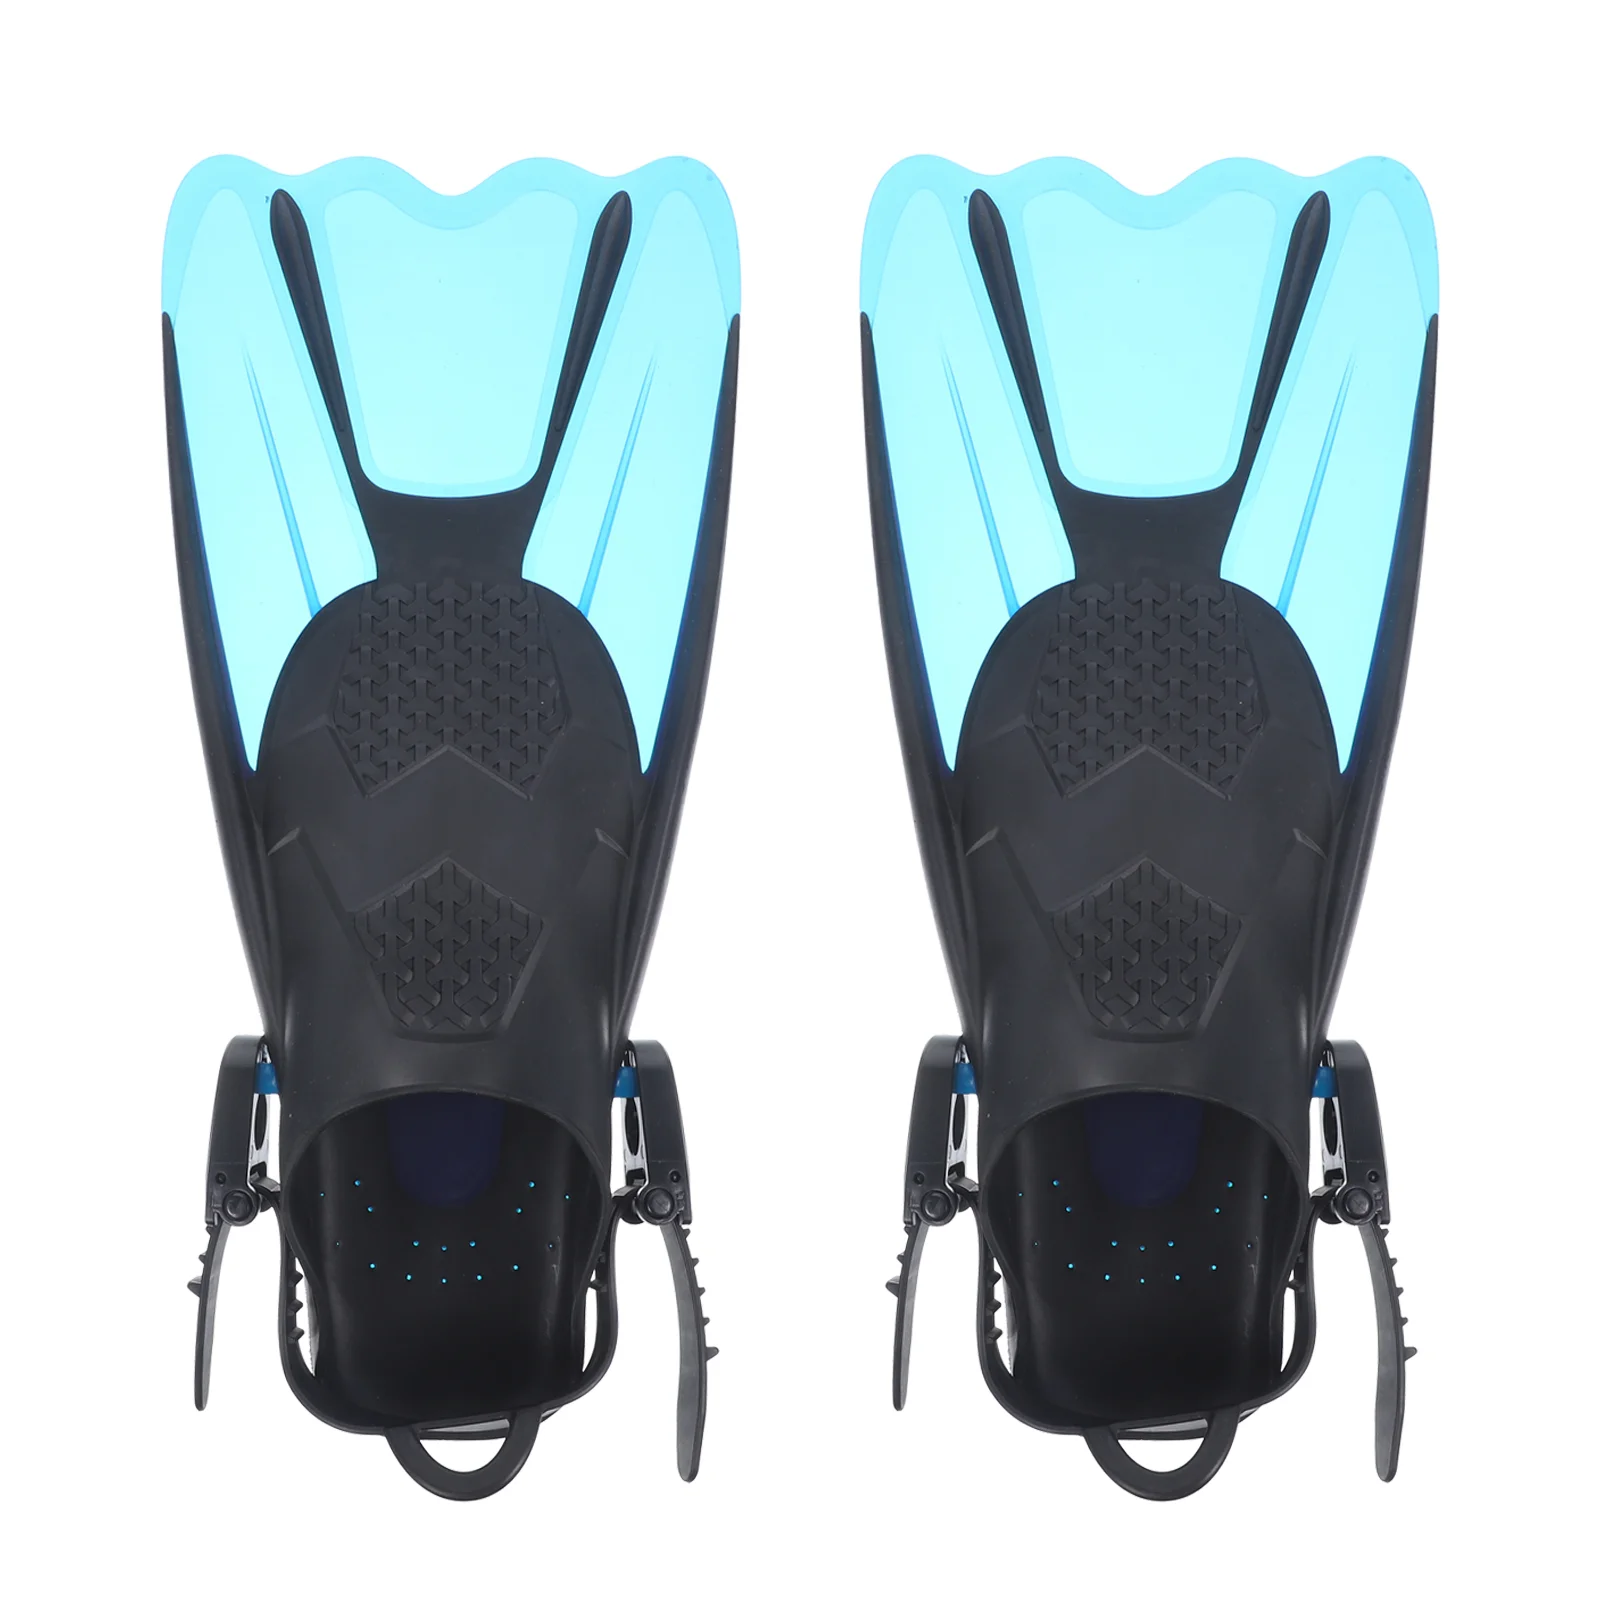 

Fins Flippers Swimming Swim Snorkeling Flipper Training Diving Supplies Scuba Freediving Floating Pool Rubber Water Short Adults